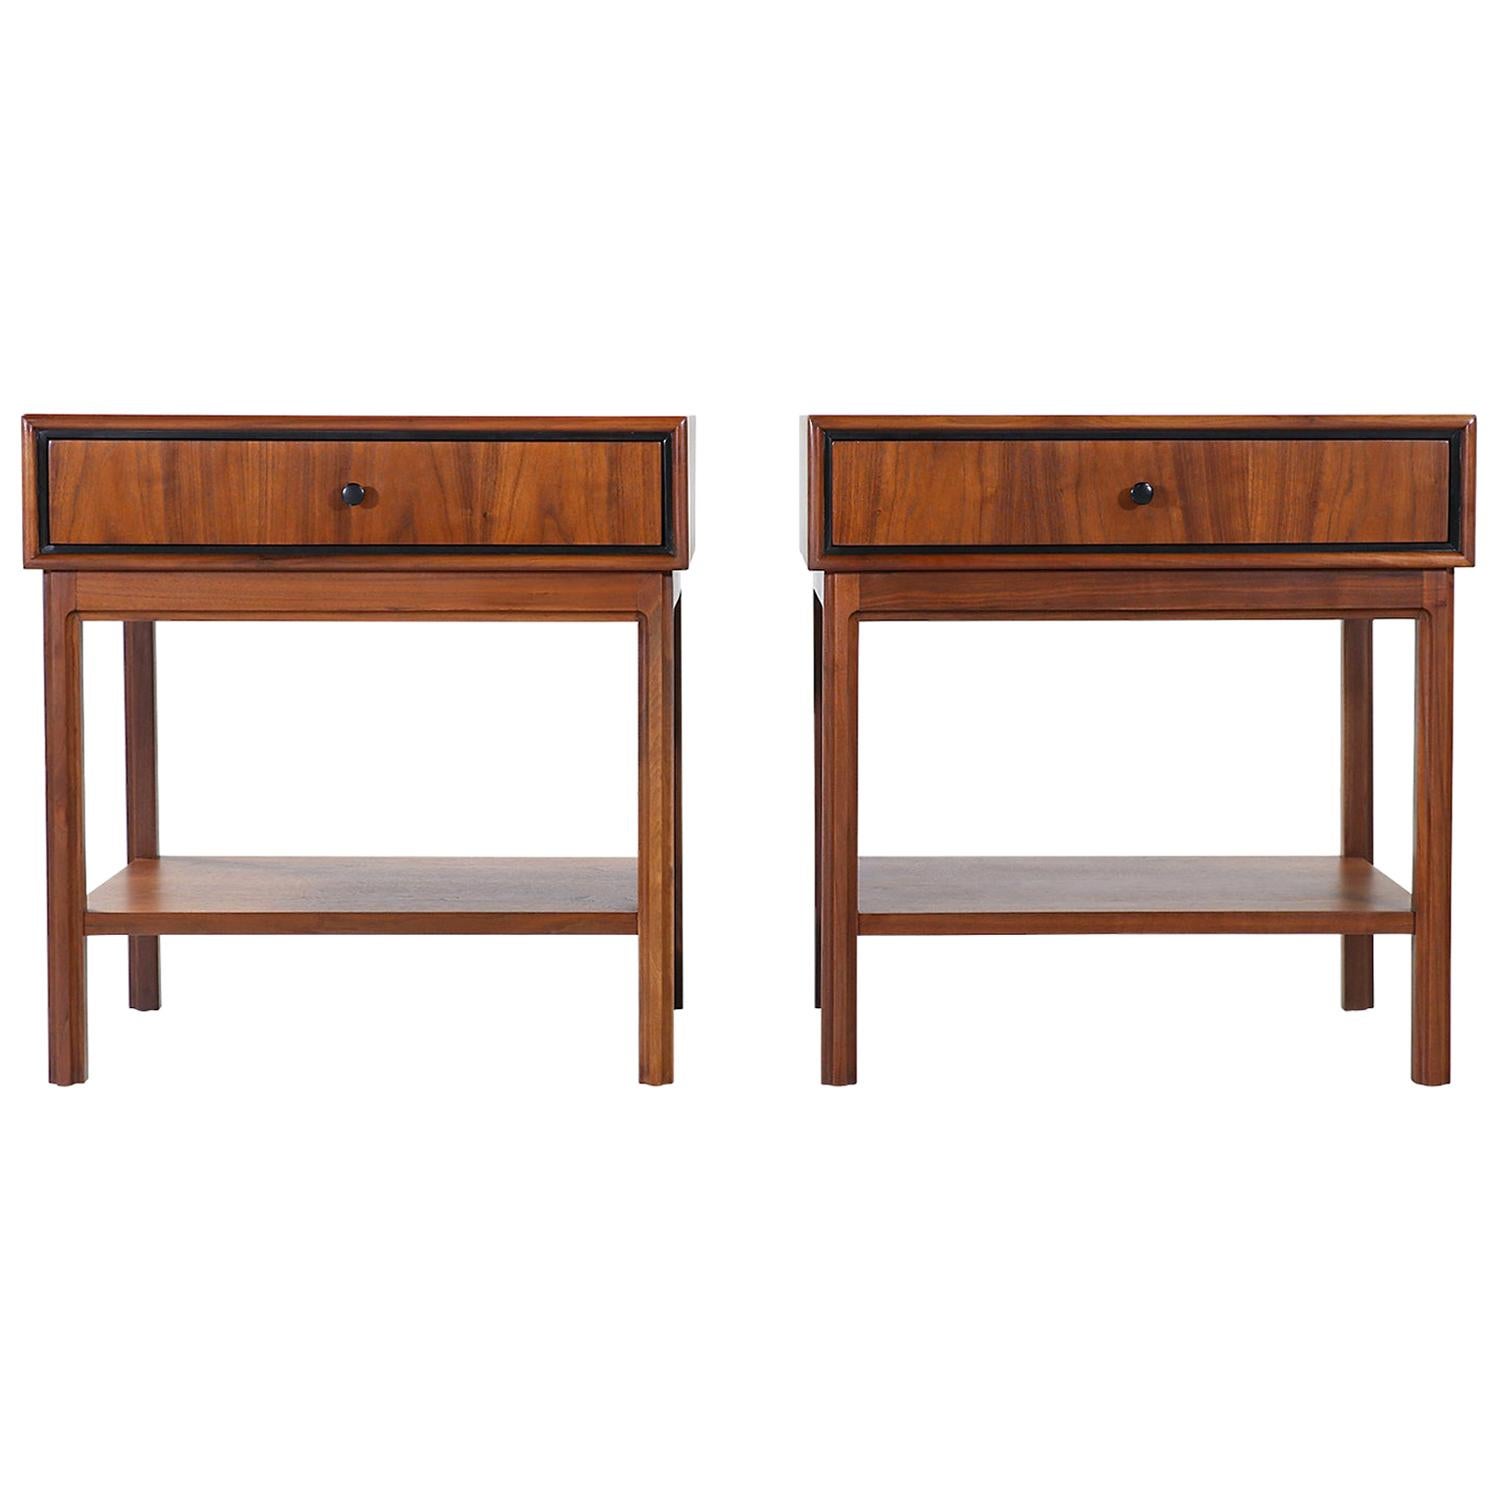 Two-tier Nightstands Designed by Jack Cartwright for Founders circa 1963